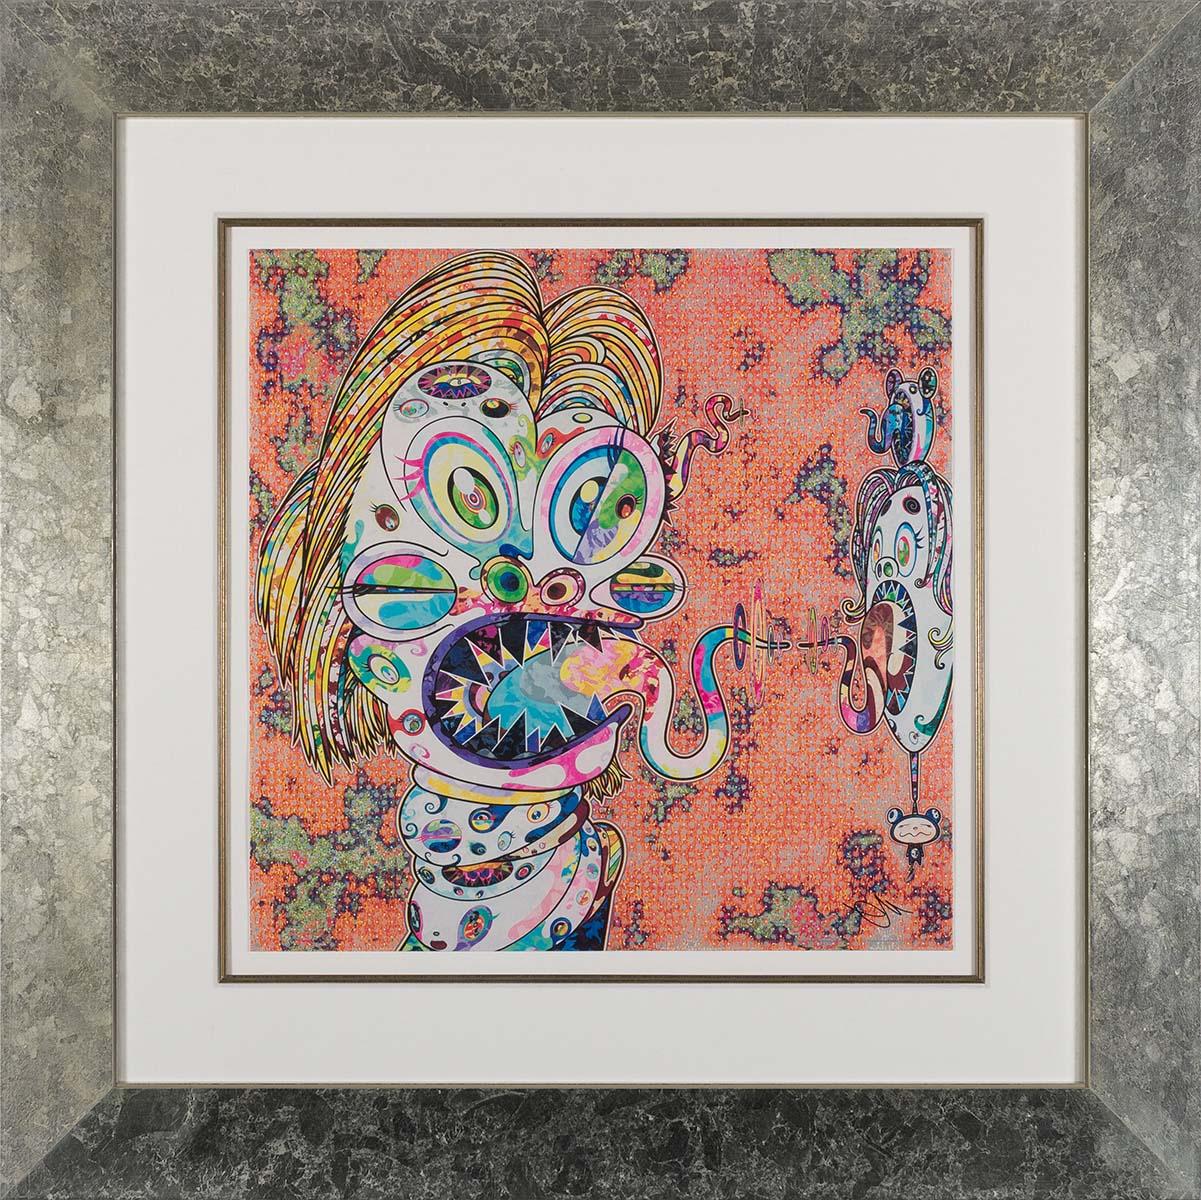 Homage to Francis Bacon (Study for Head of Isabel Rawsthorne, moiré) - Print by Takashi Murakami